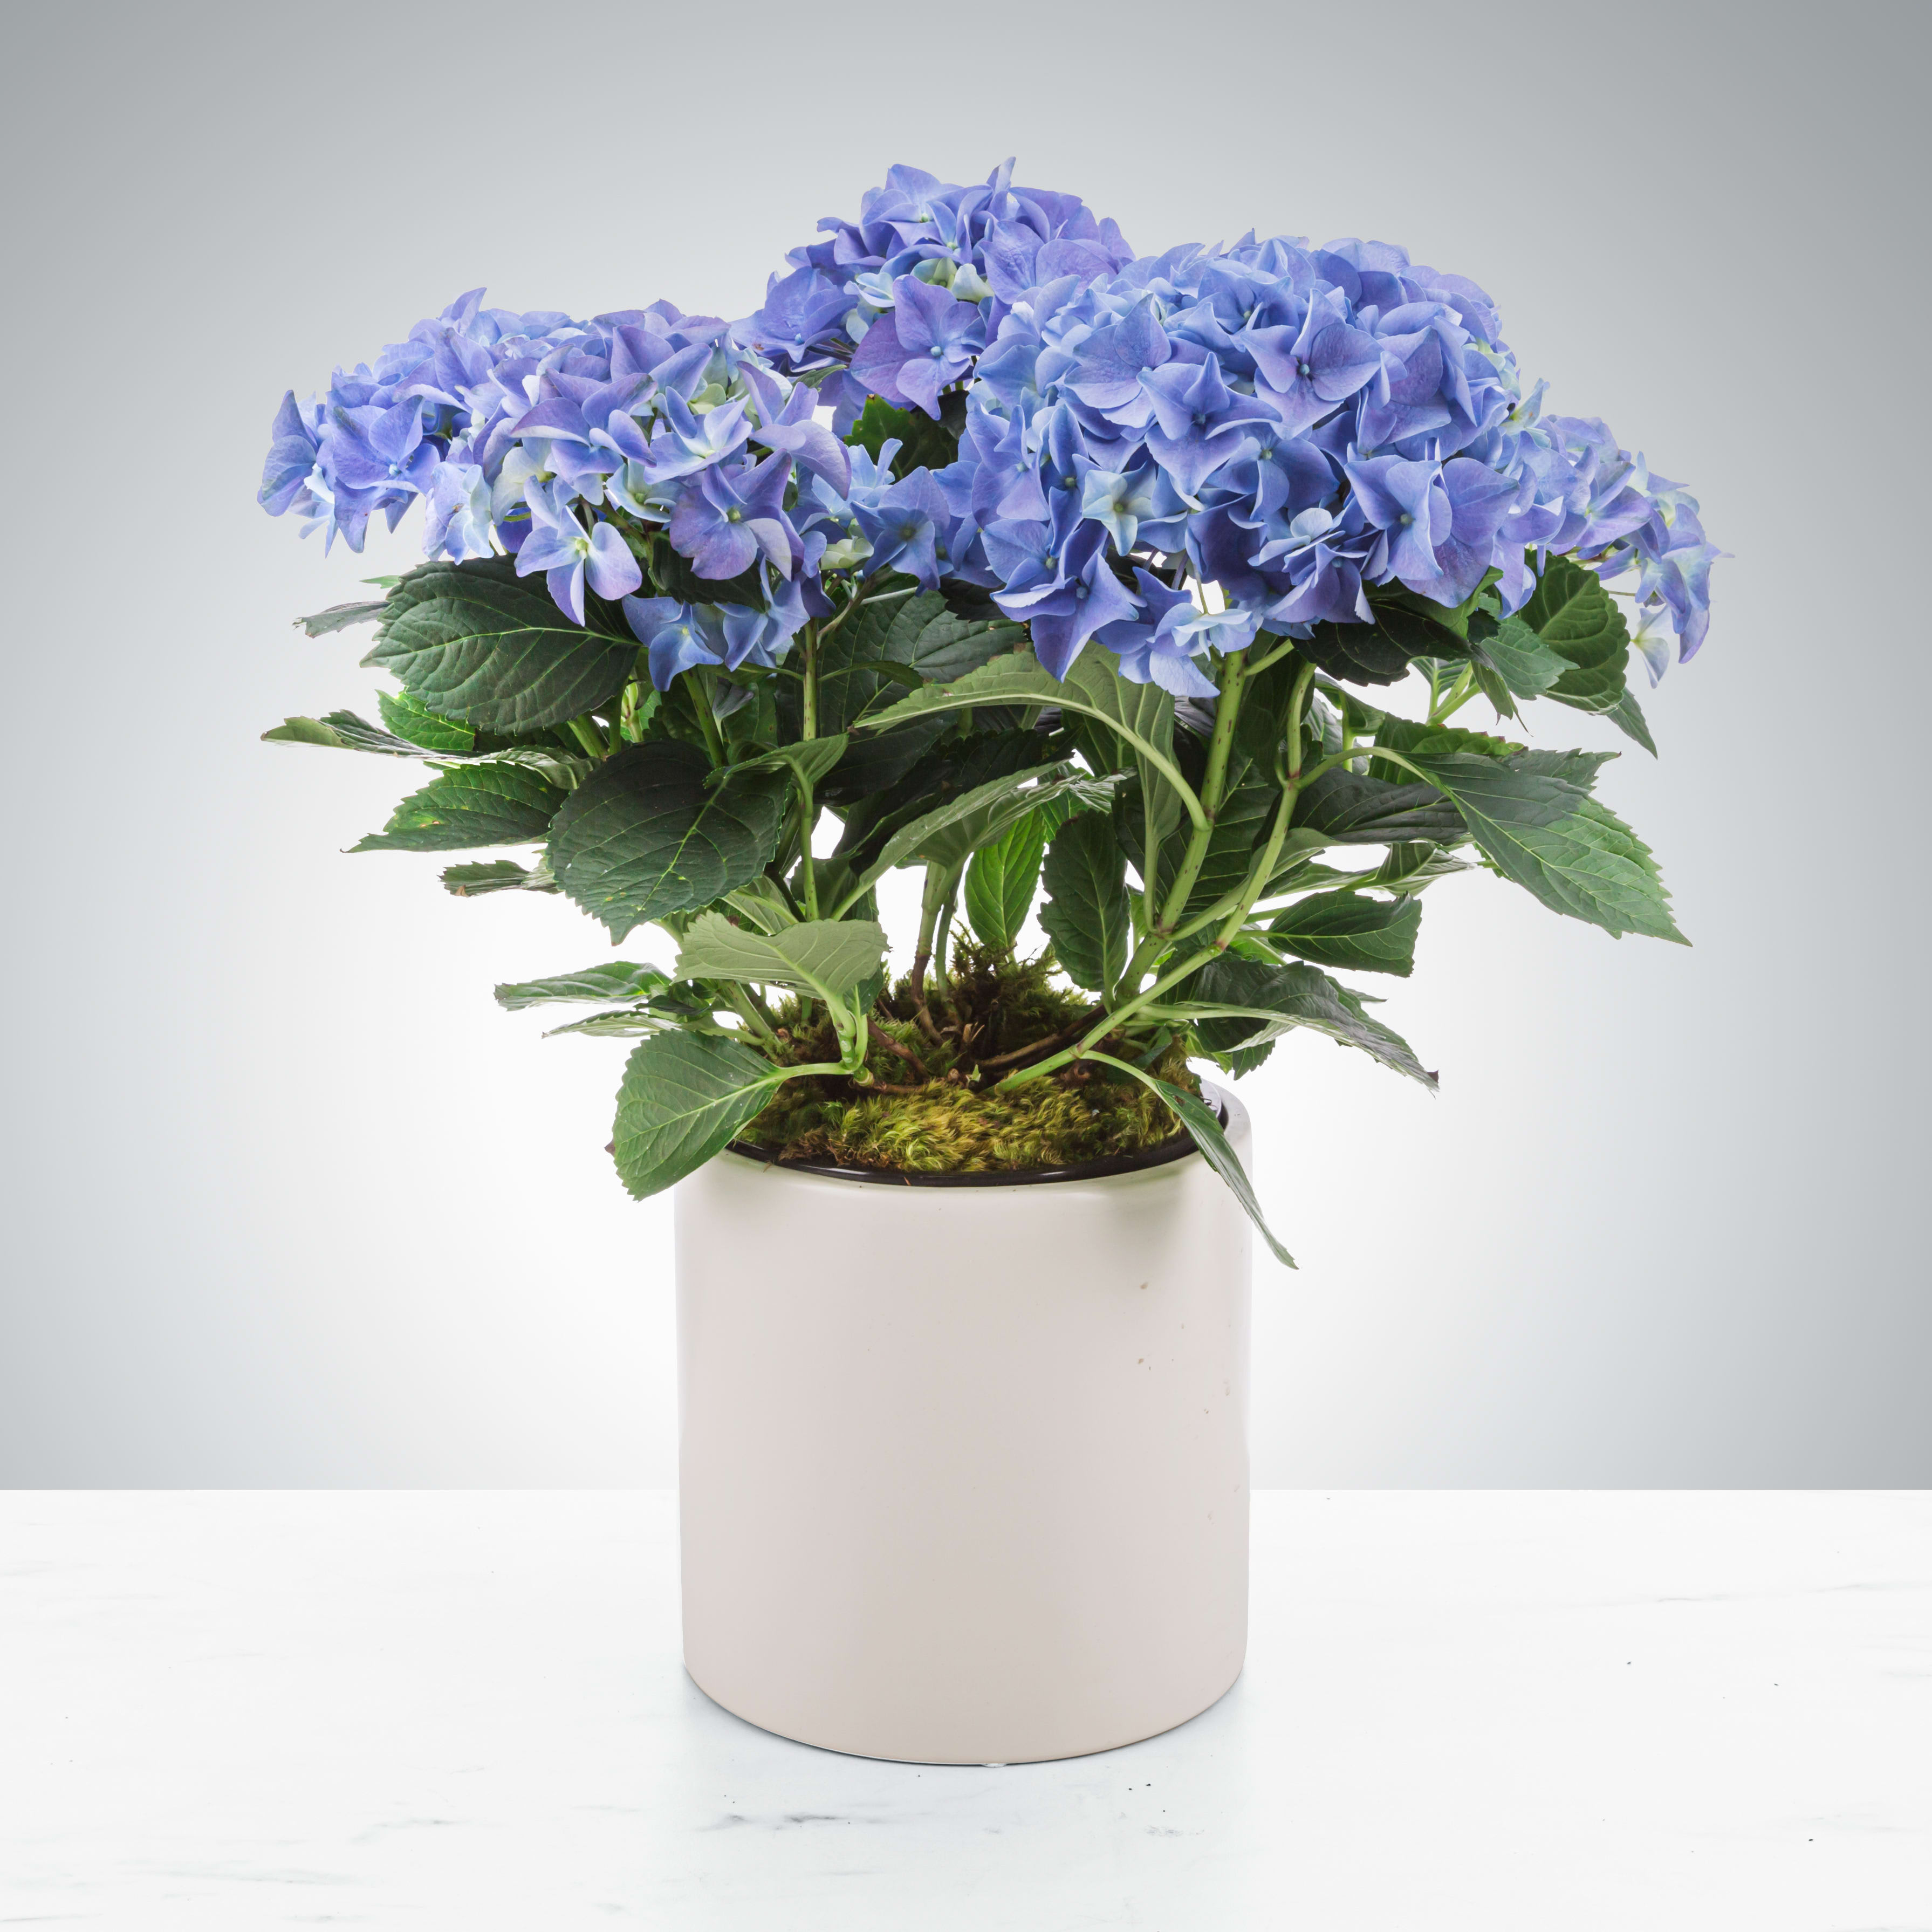 Hydrangea Plant by BloomNation™ - Send a beautiful hydrangeas plant! Keep the flowers blooming by putting them in a bright (but not the brightest) window. Perfect for Mother's Day, Just Because, or a Birthday!